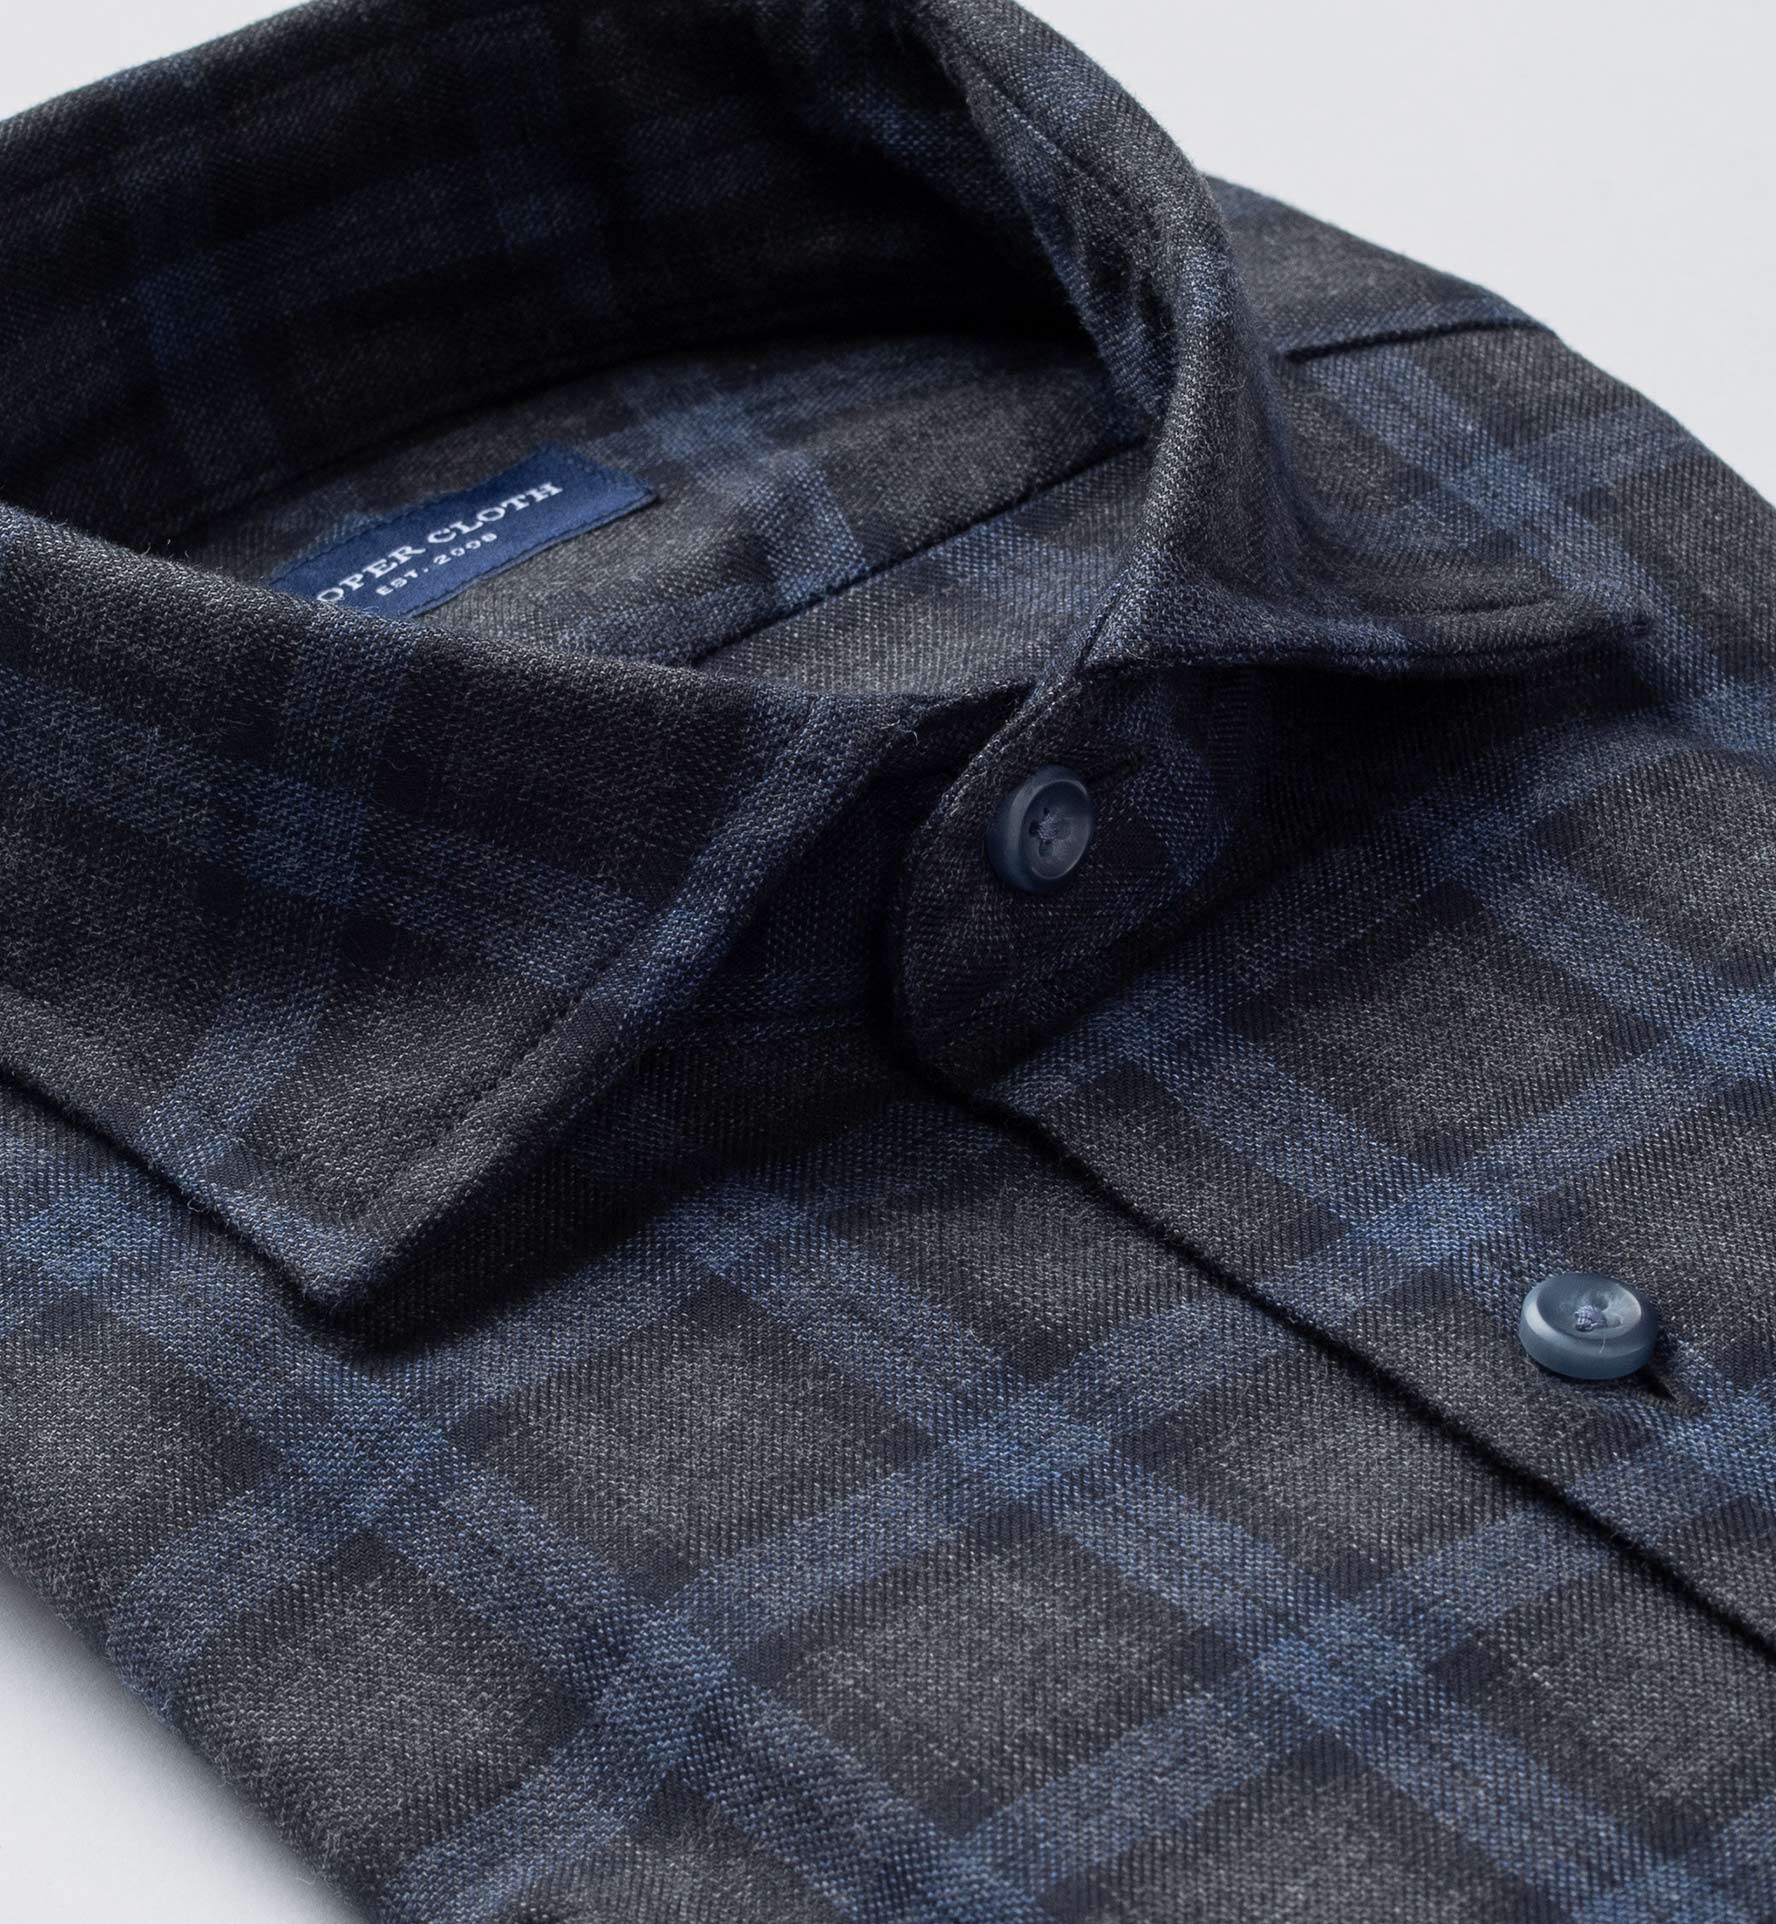 Stowe Charcoal and Navy Plaid Flannel Men's Dress Shirt by Proper Cloth